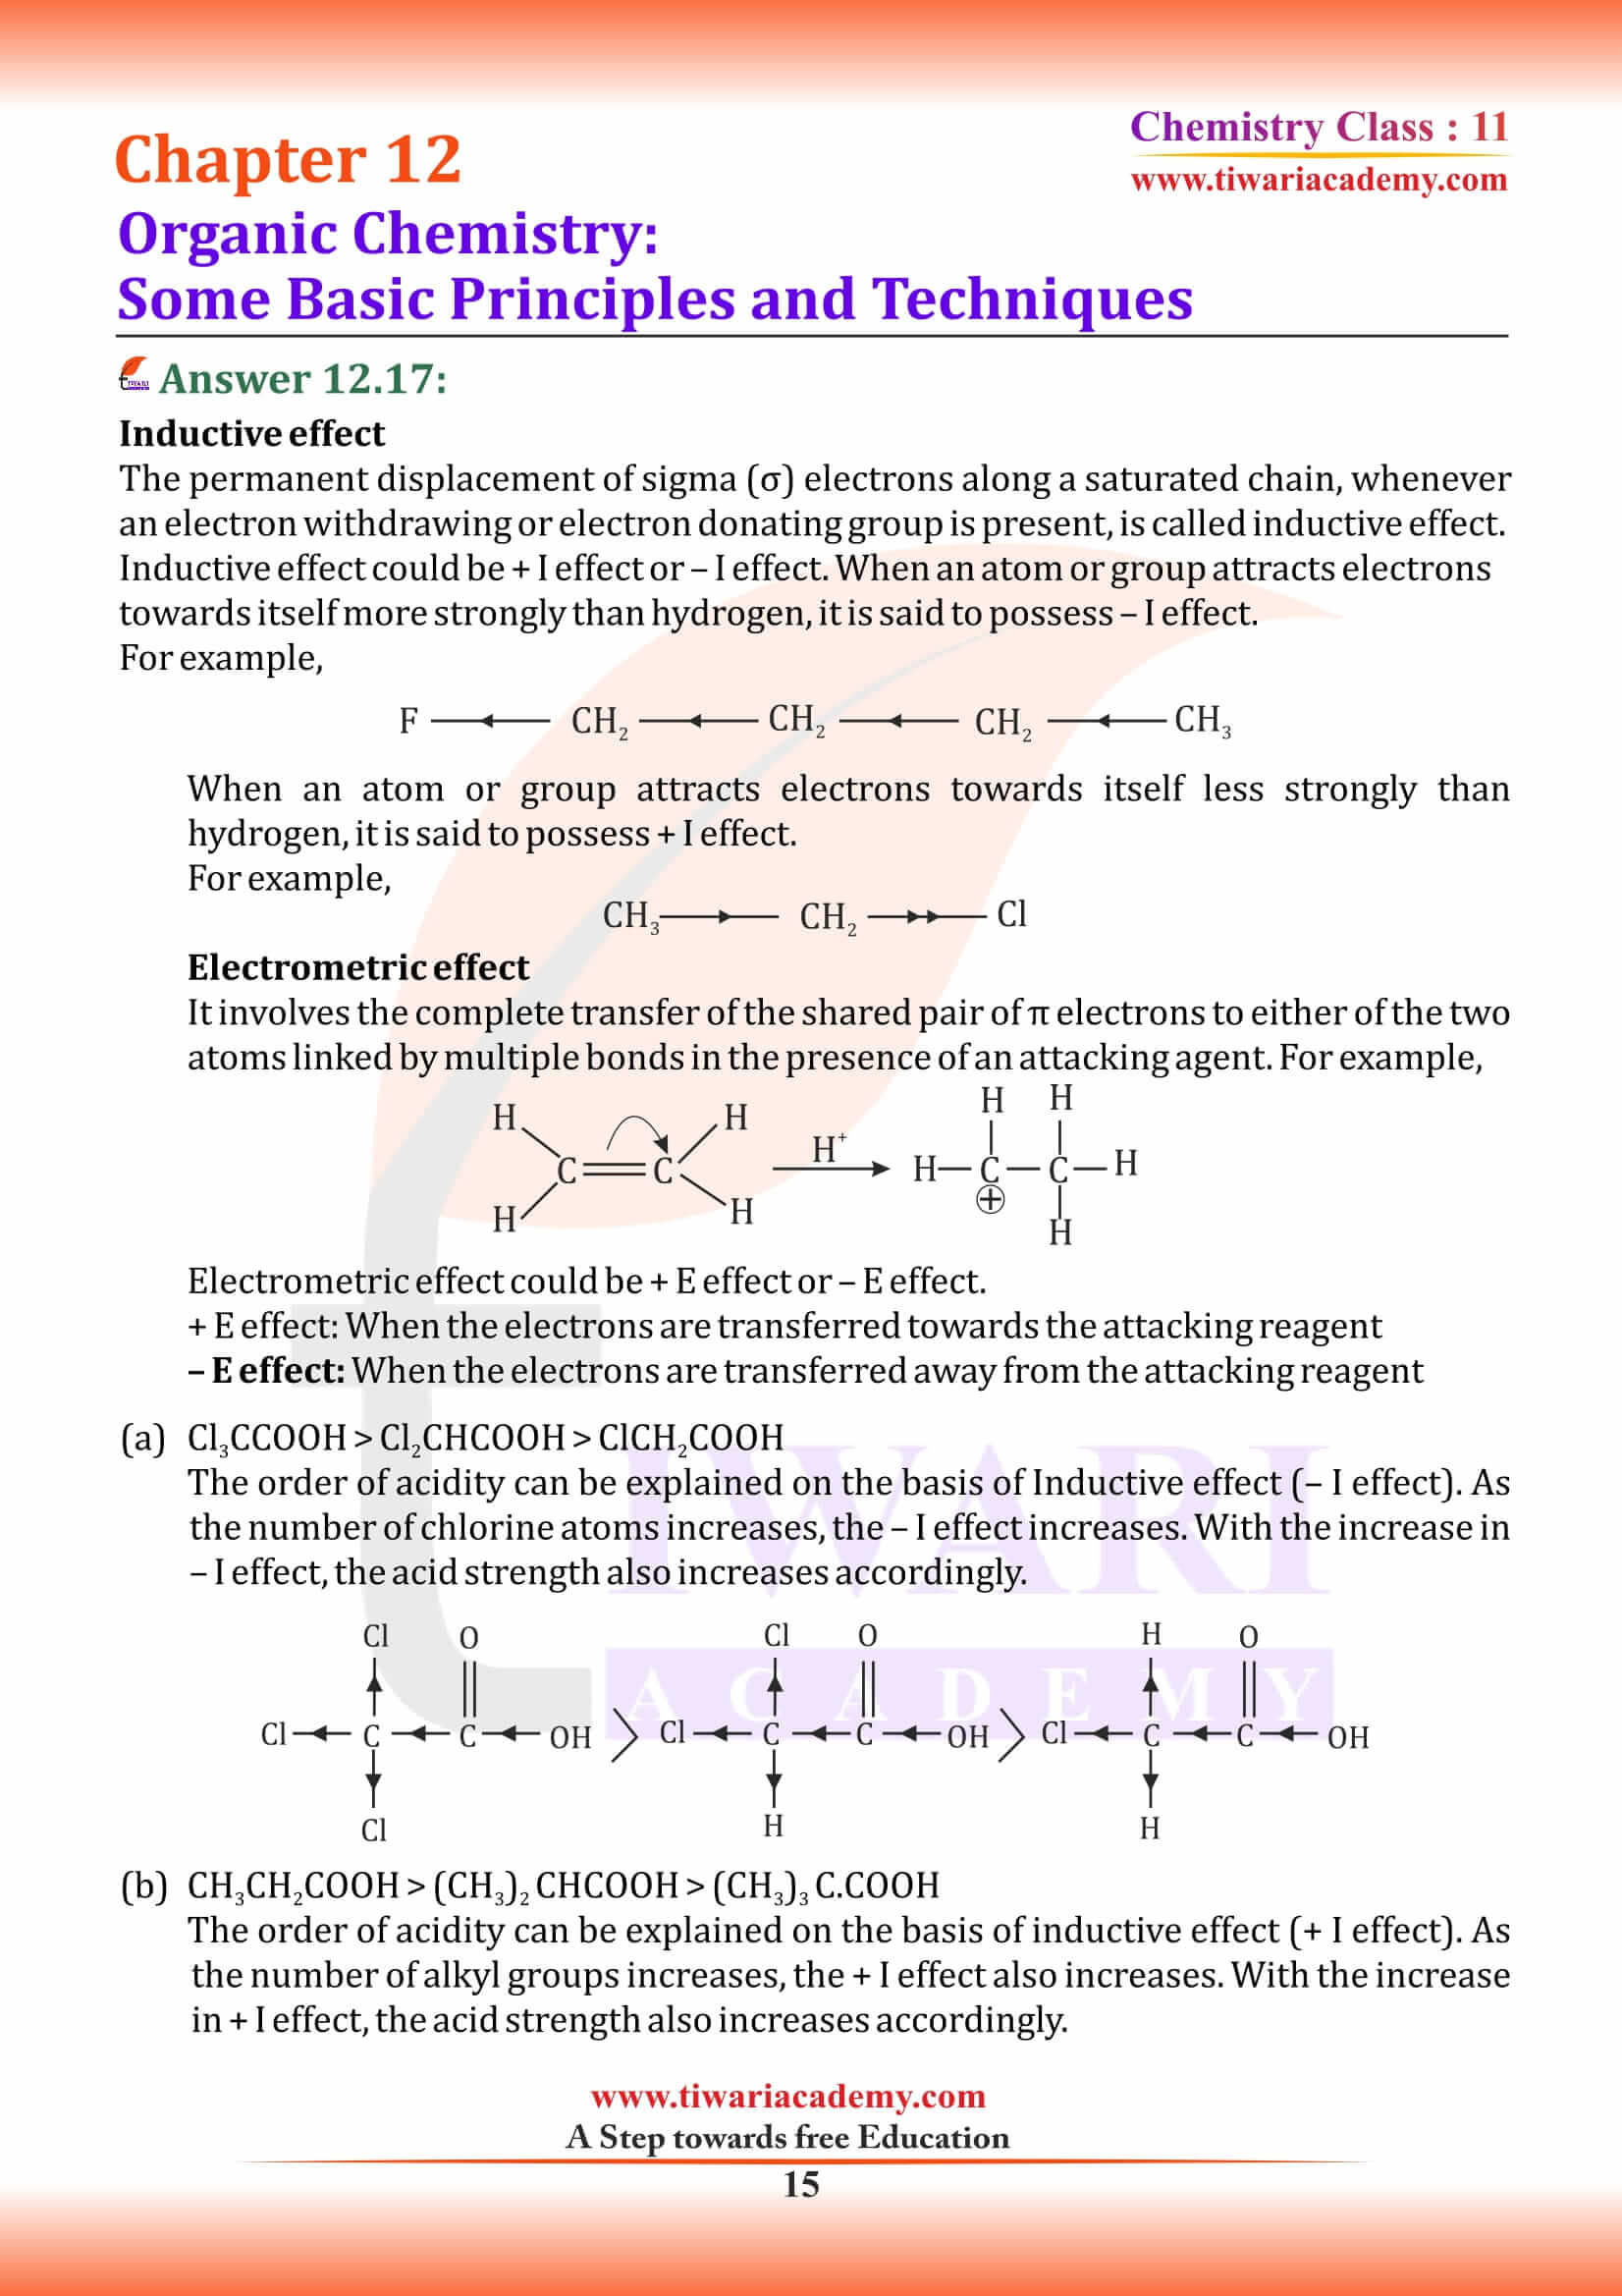 Class 11 Chemistry Chapter 12 PDF fee